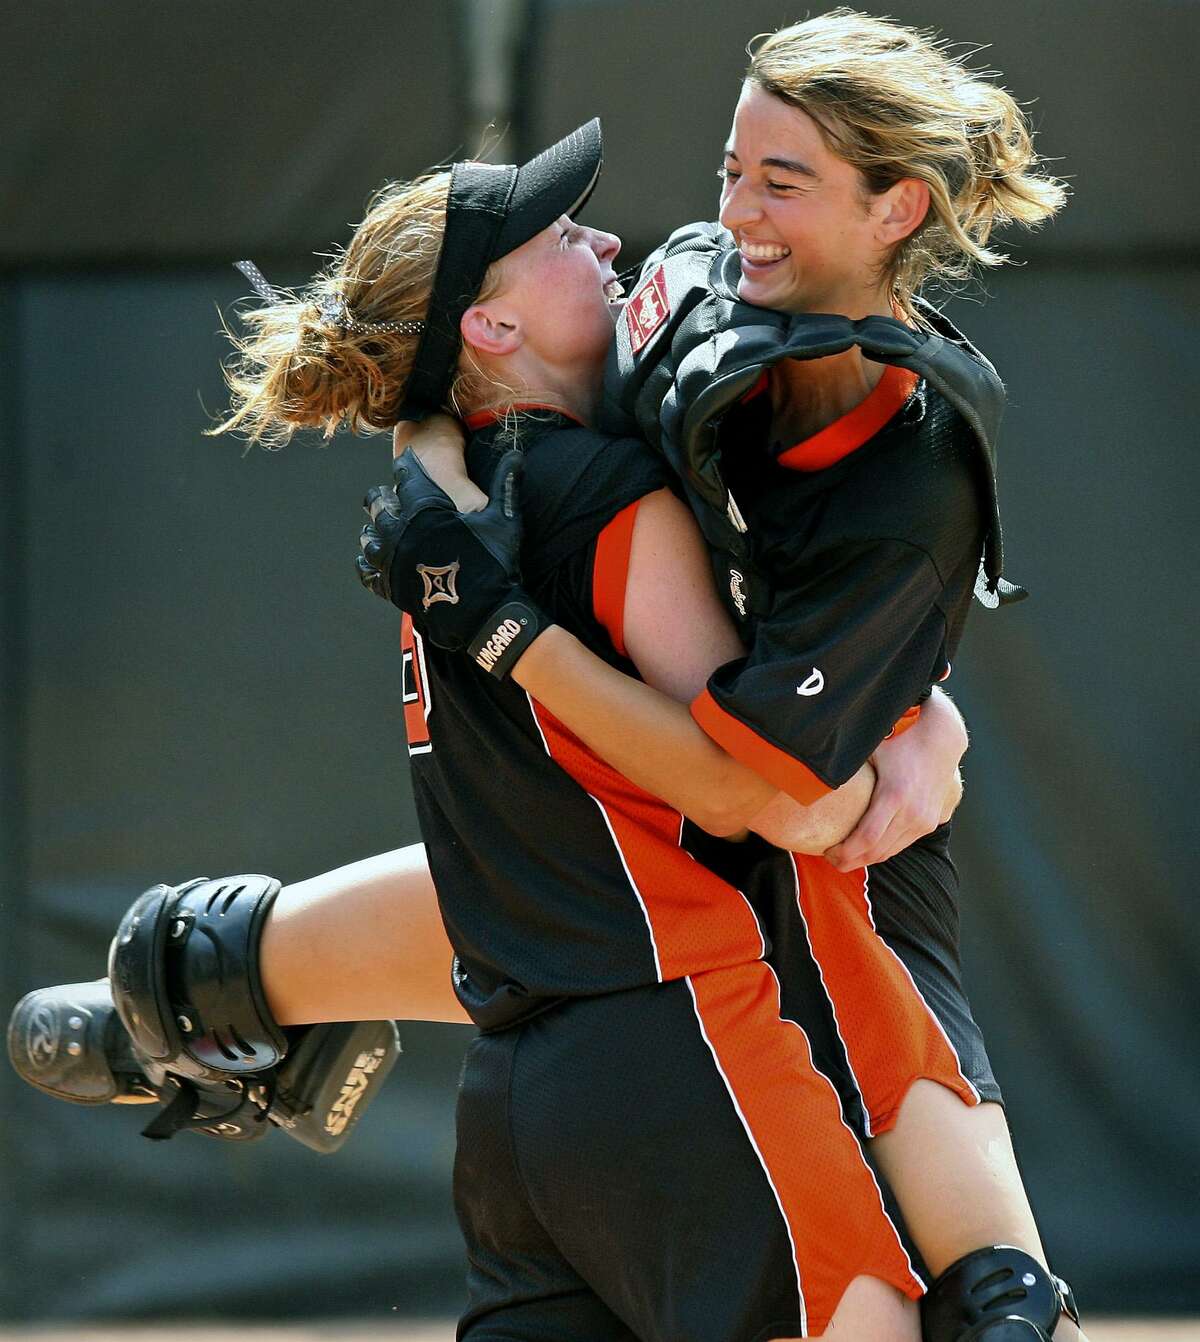 Medina Valley pitcher Crystal Keller catches her catcher Megan Heiligman leaping into her arms as Medina Valley gets the last out in their state championship game against Burkburnett Saturday afternoon. MEDINA VALLEY VERSUS BURKBURNETT STATE SOFTBALL CHAMPIONSHIP AT MCCOMBS FIELD IN AUSTIN. JUNE 2, 2007 TOM REEL/STAFF